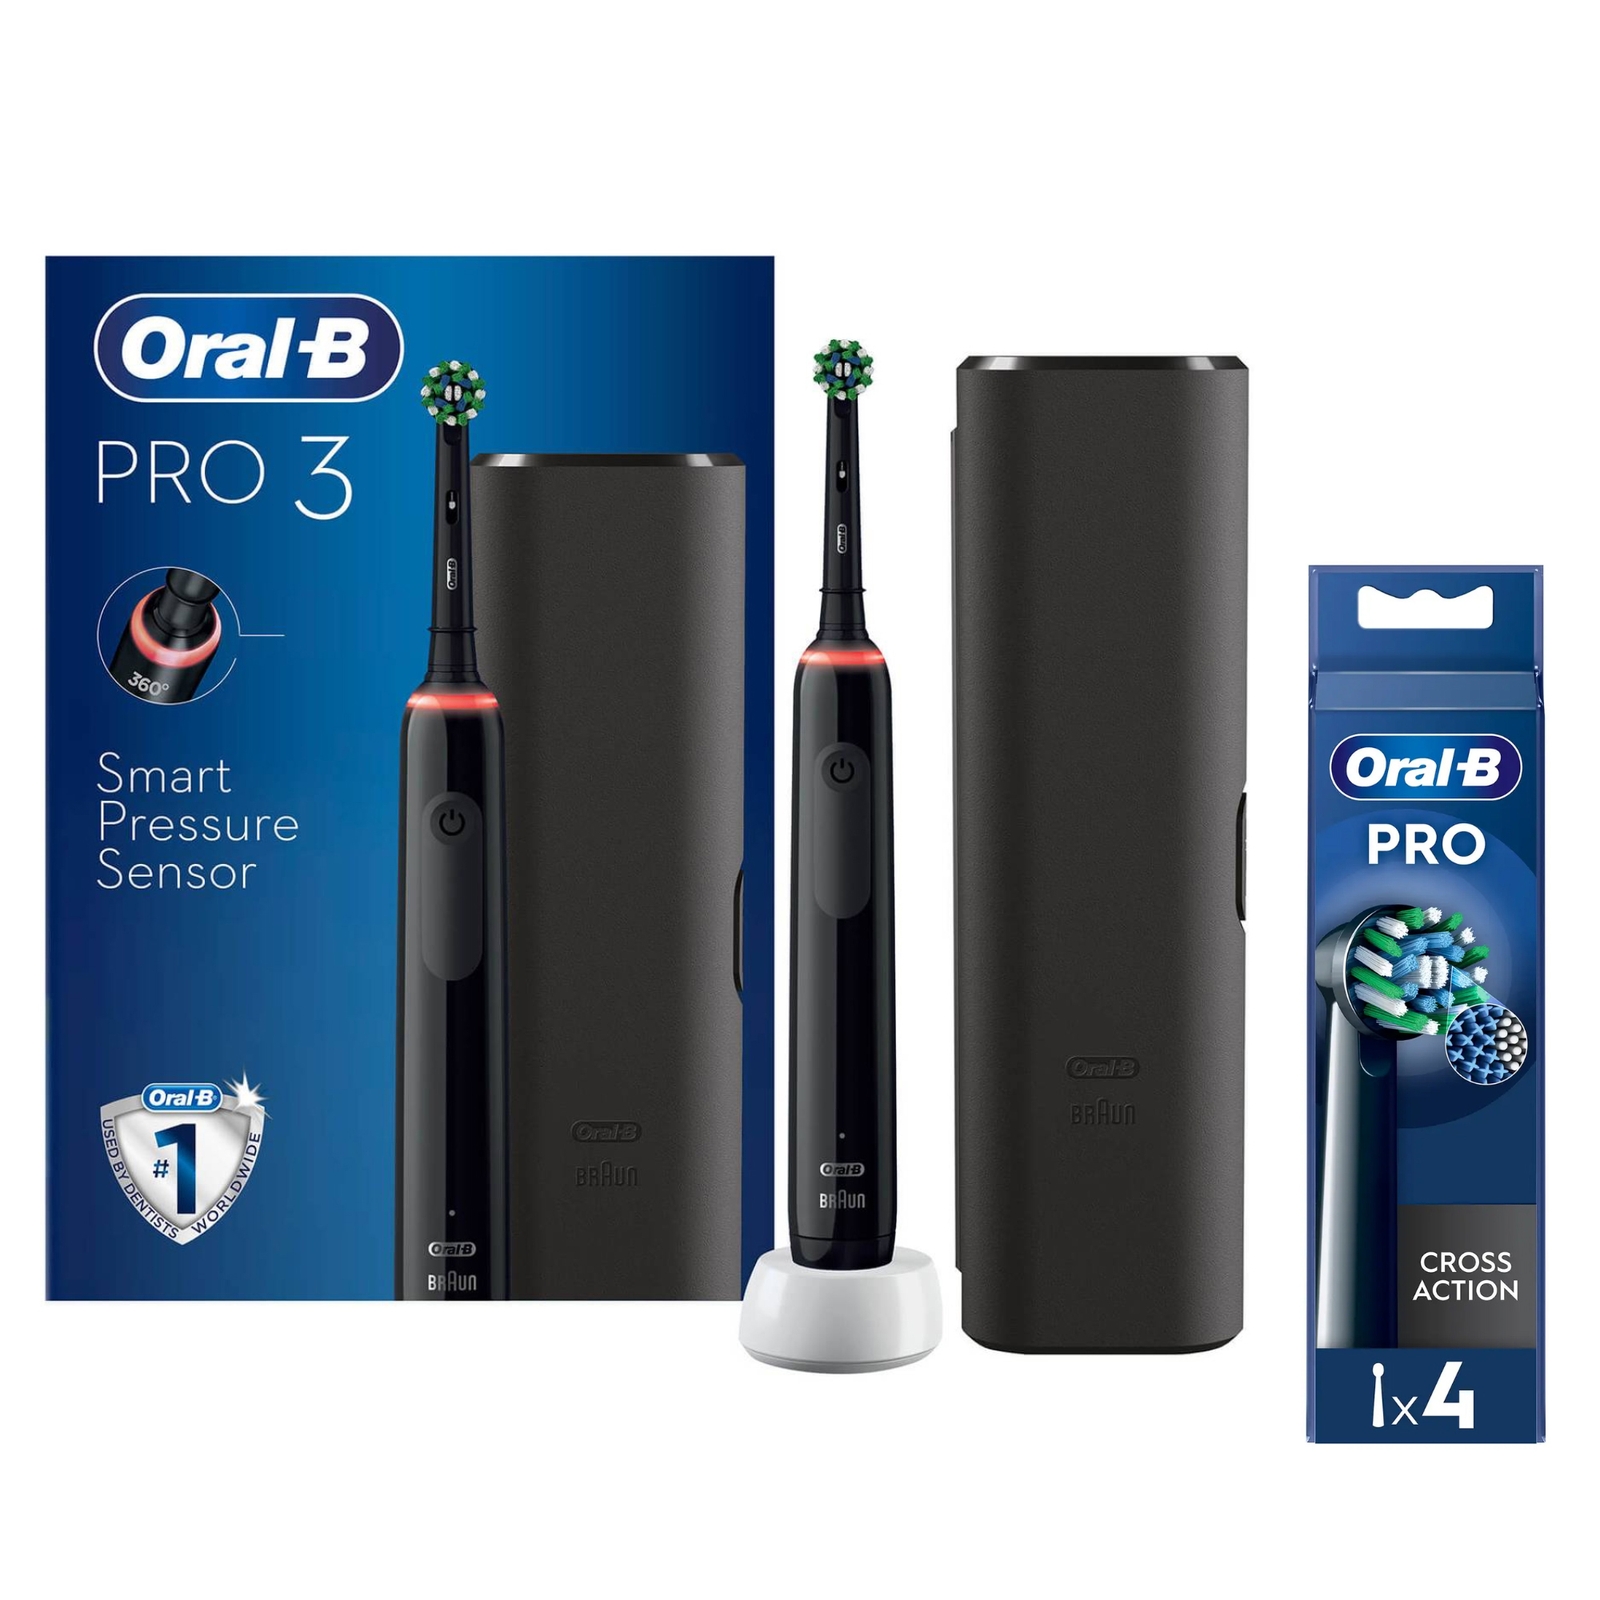 Oral B Pro 3500 Cross Action Black Electric Toothbrush with Travel Case - Toothbrush + 4 Refills